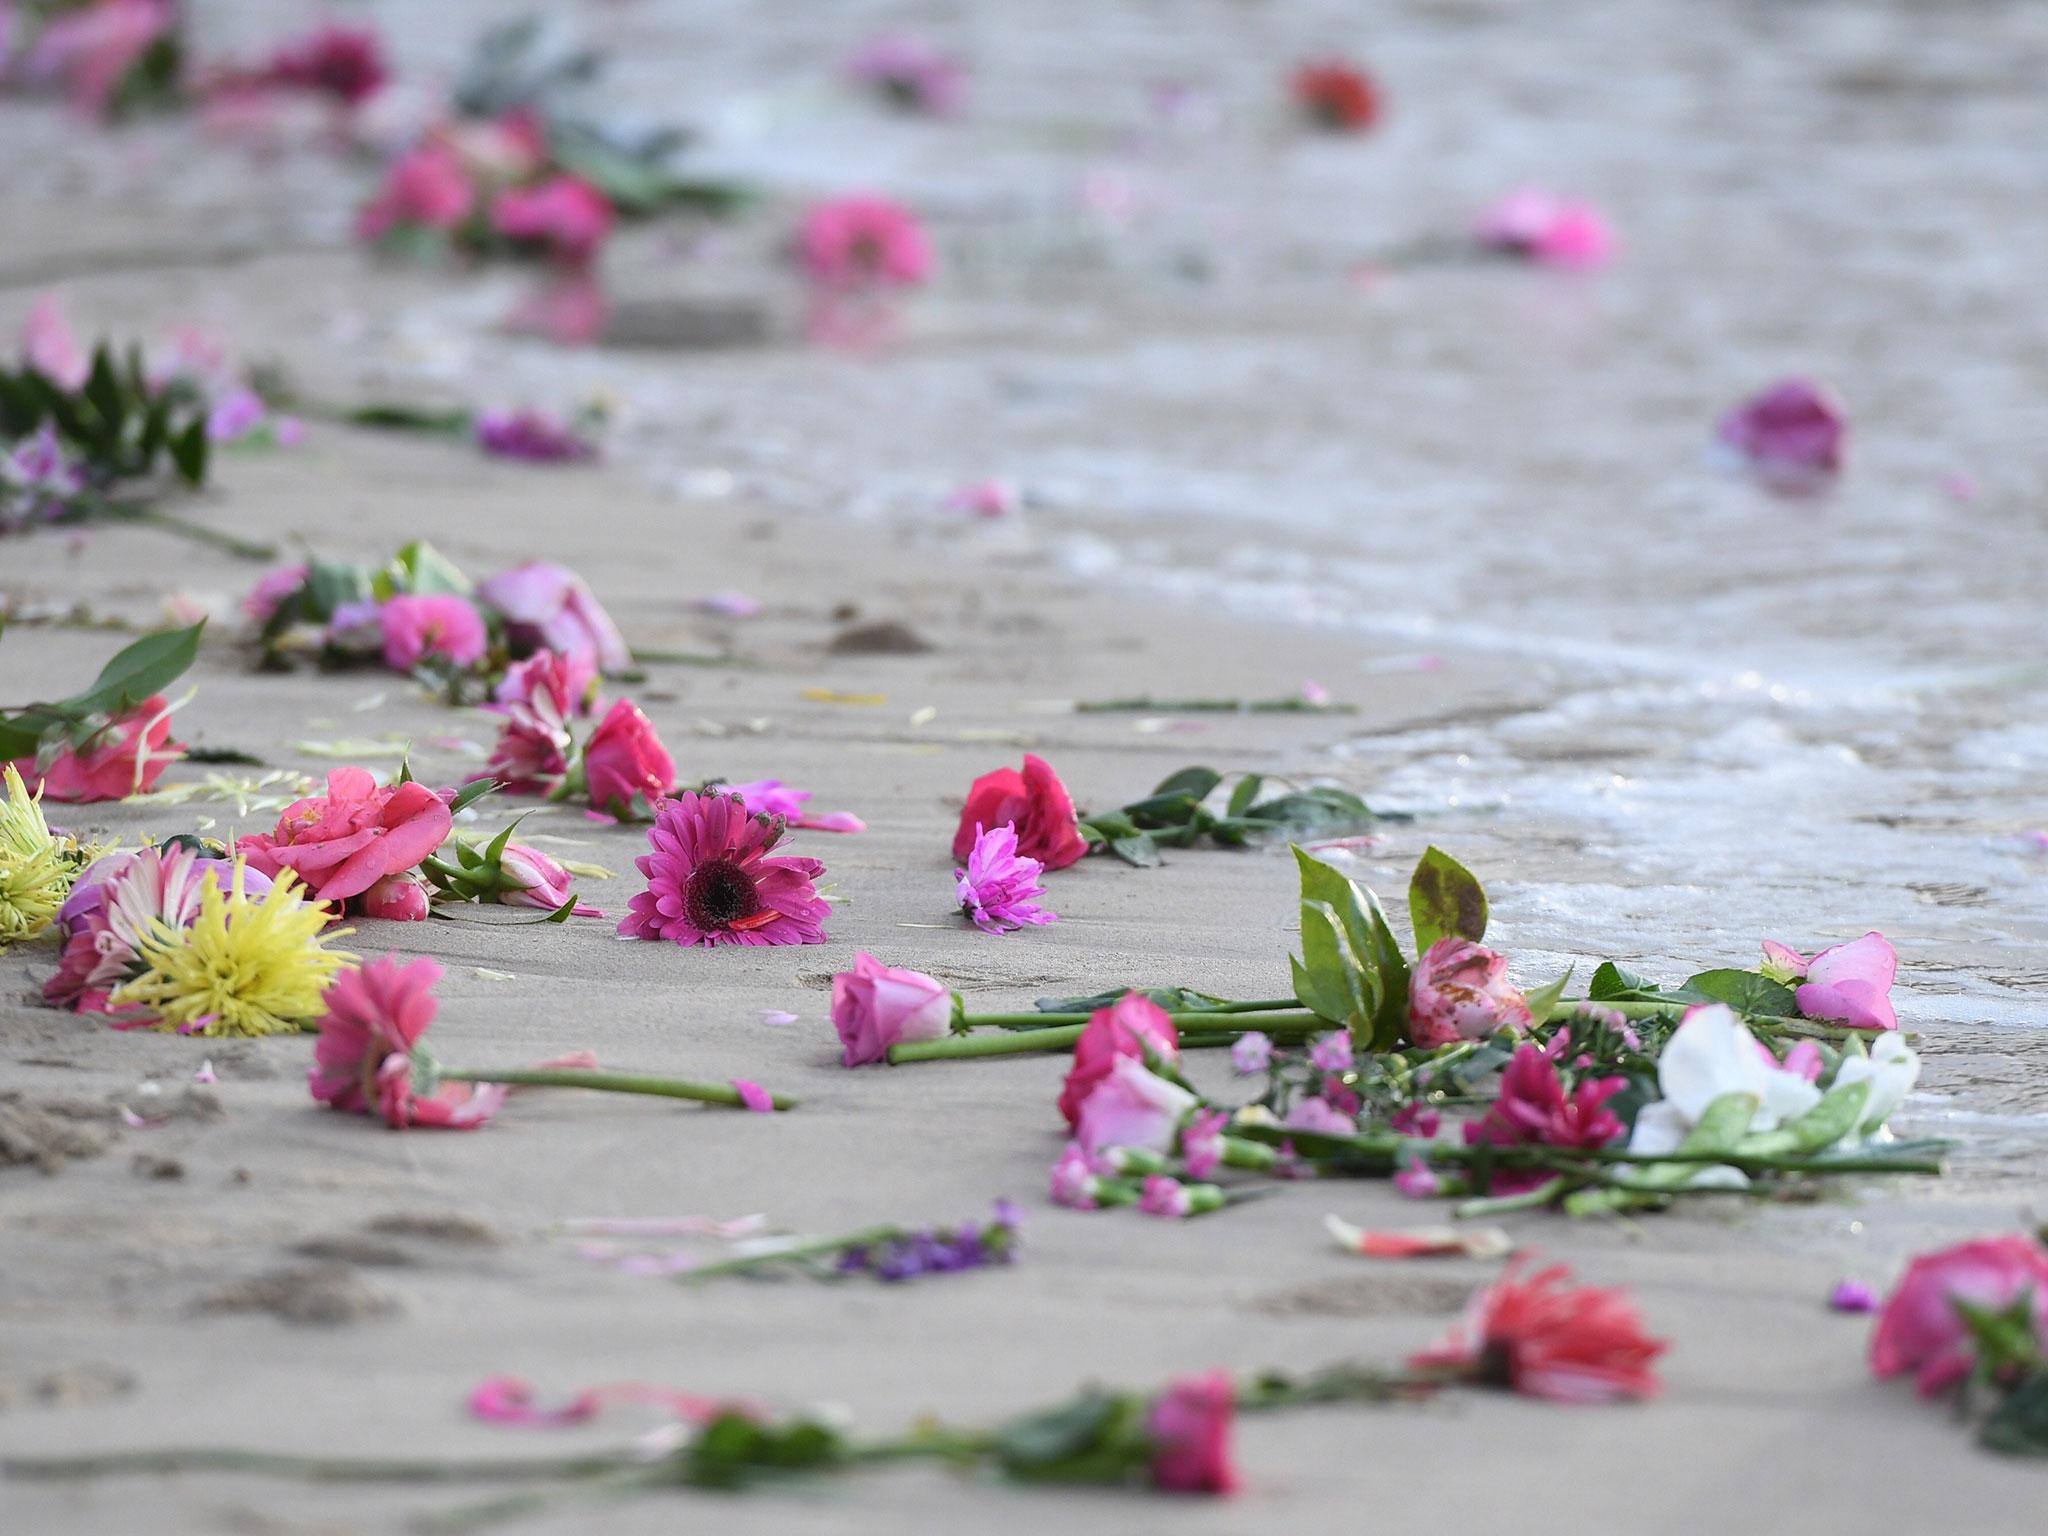 Hundreds of pink flowers wash onto the beach after family and friends gathered on Freshwater Beach for a candlelight vigil, where they threw hundreds of pink flowers into the ocean for Justine Damond